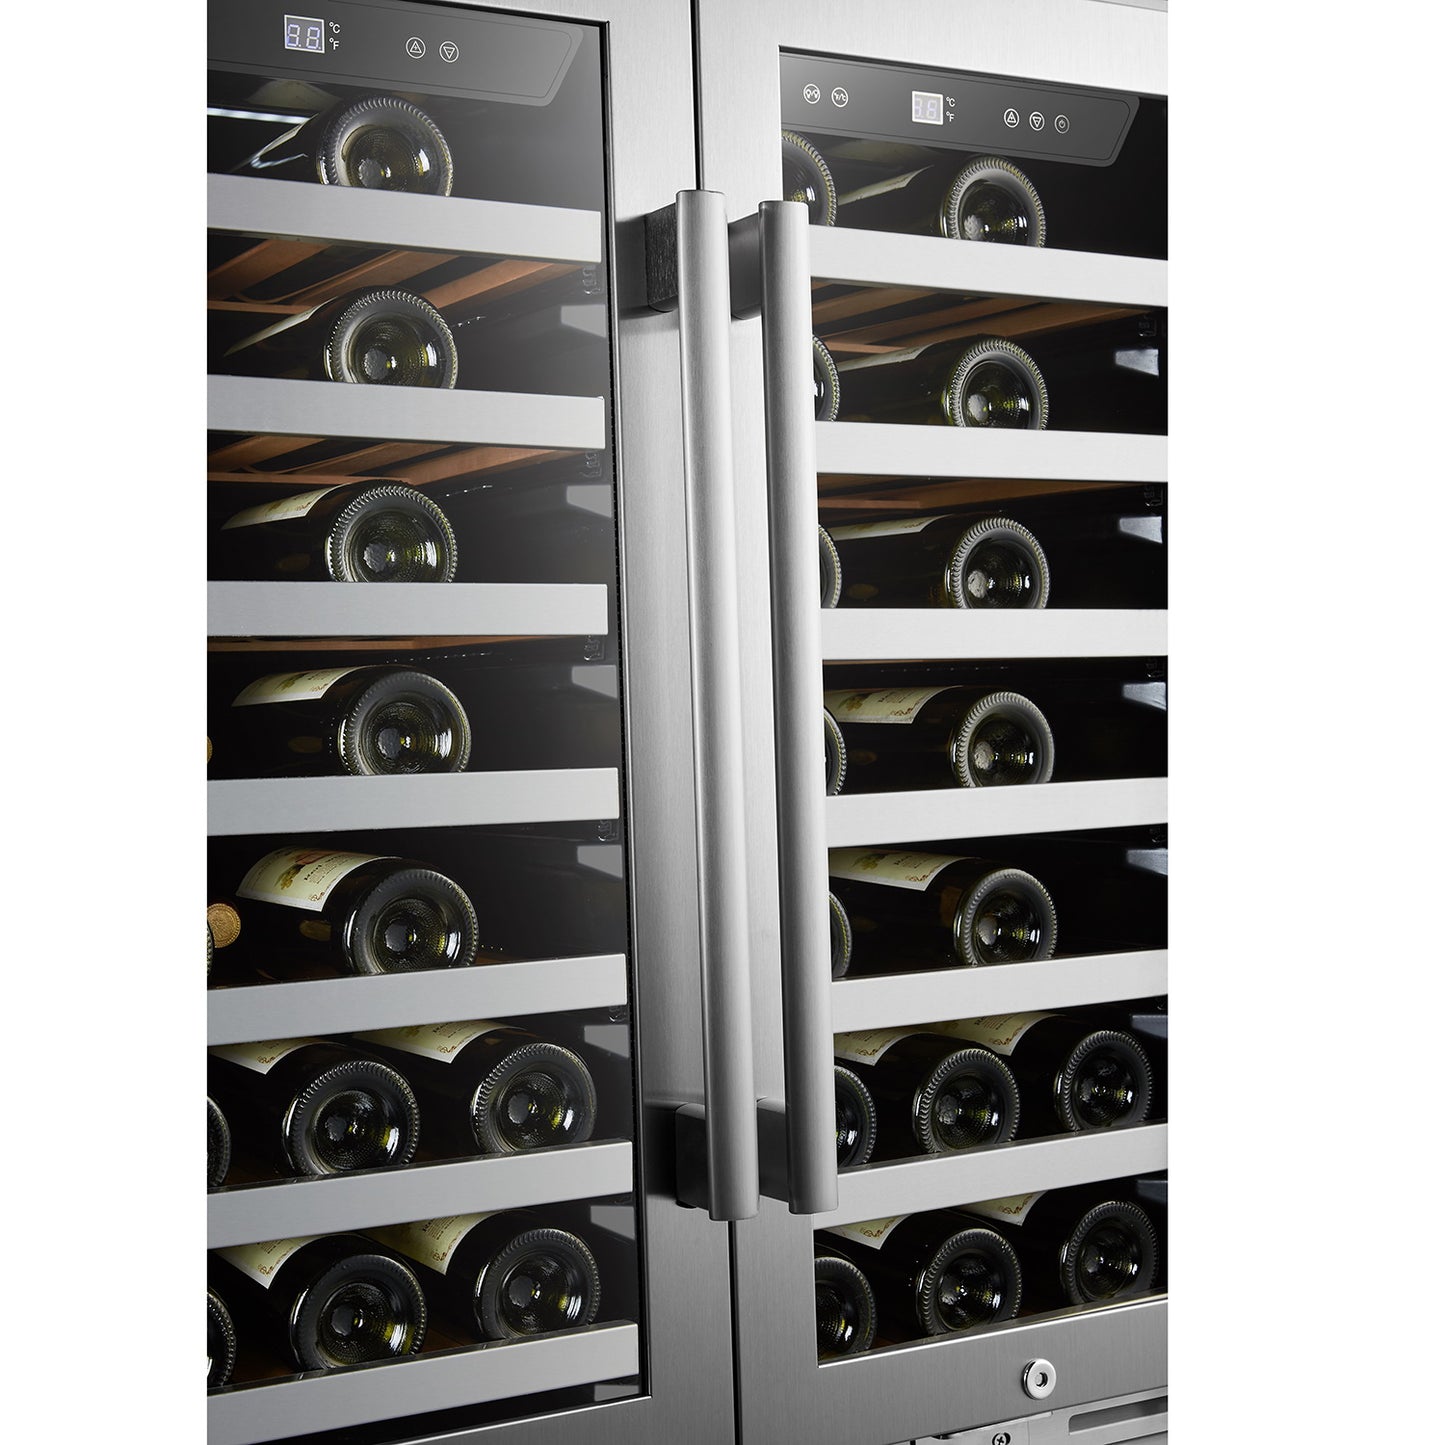 LanboPro LP66D - Stainless Steel Dual Zone Wine Cooler - Seamless Stainless Steel French Doors 62 Bottle Capacity-Wine Fridges-Wine Whiskey and Smoke